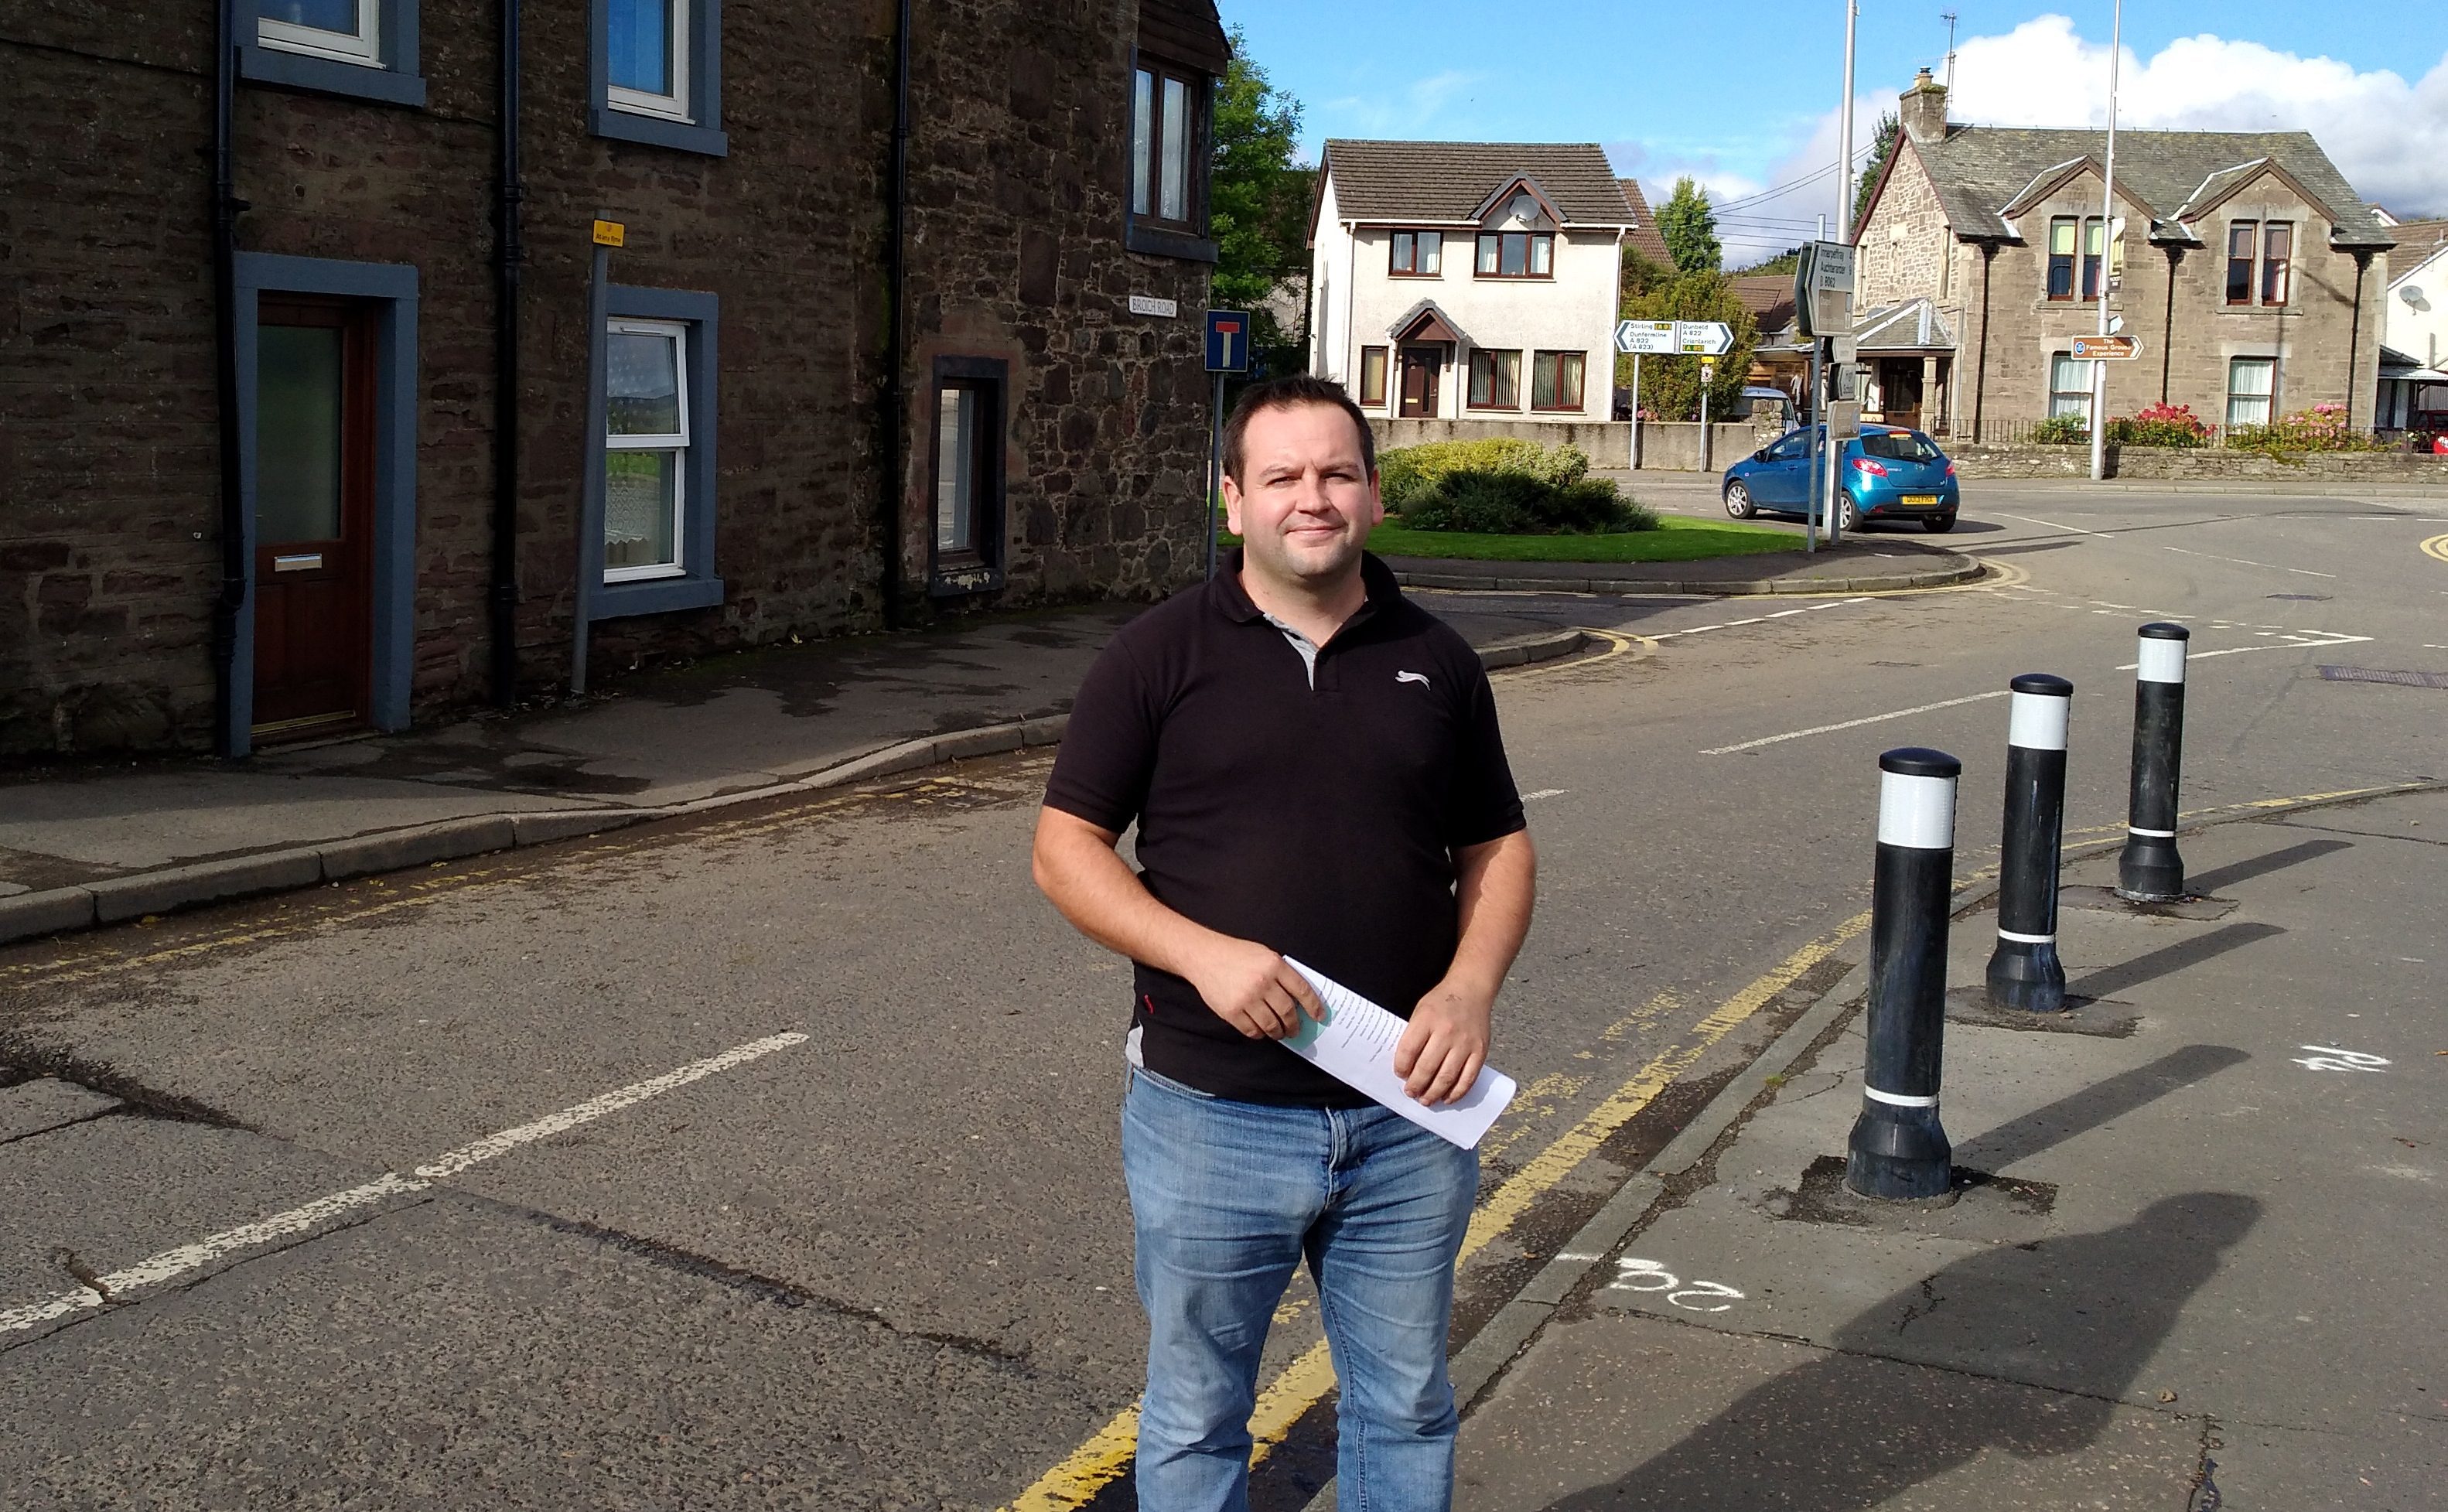 Mr Finlay at the junction of Broich Road and King Street, where he hopes significant changes will be made.